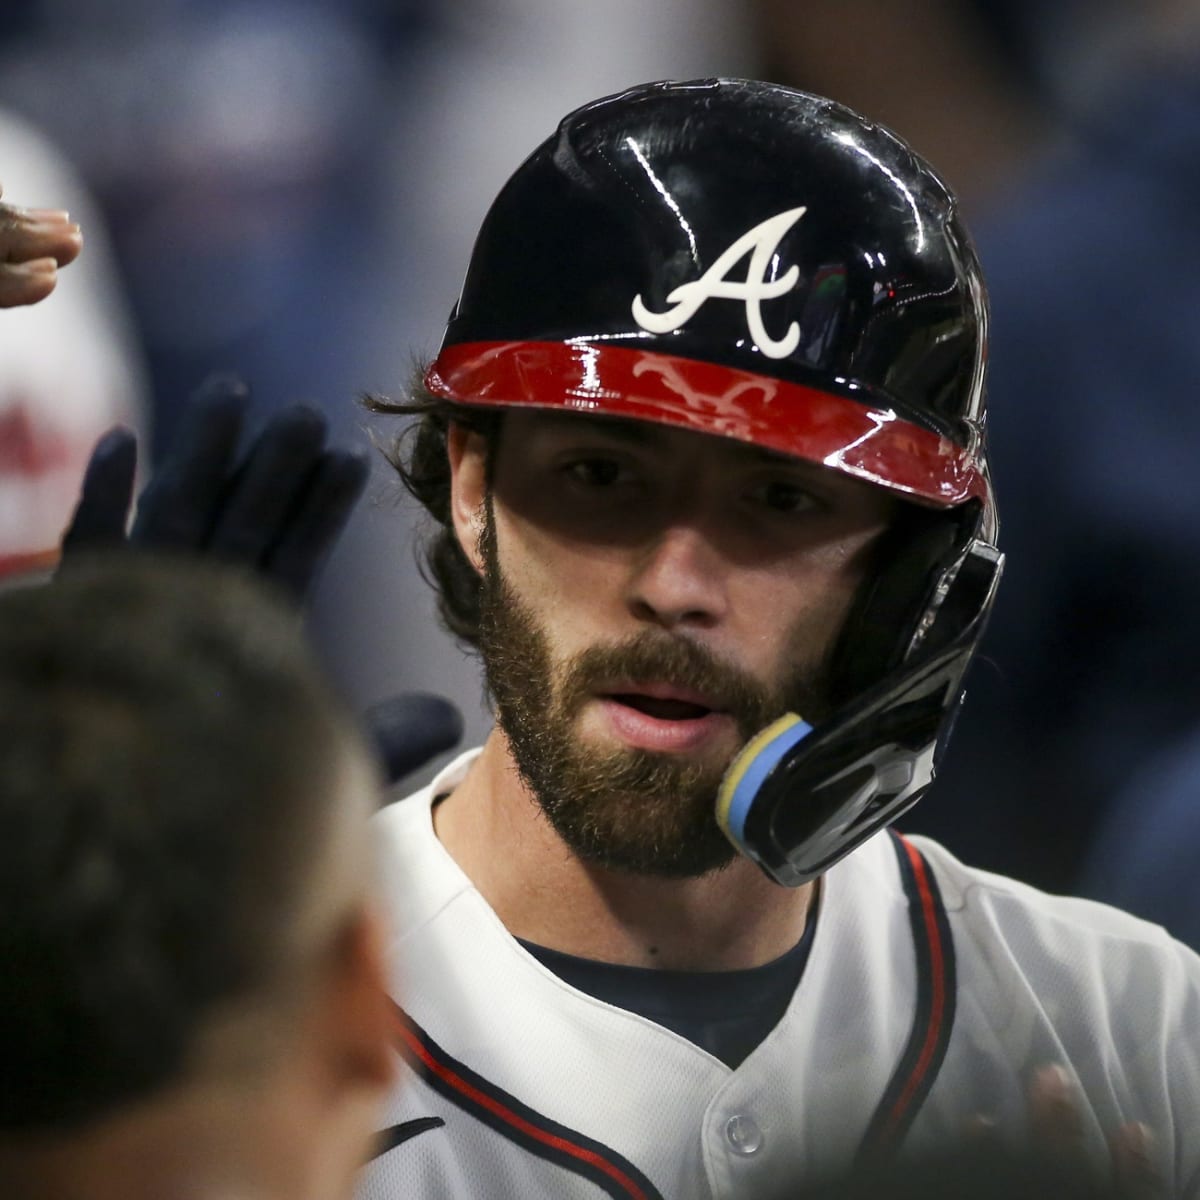 Chicago Cubs Post Dansby Swanson Welcome, Hype Video on Instagram - Fastball